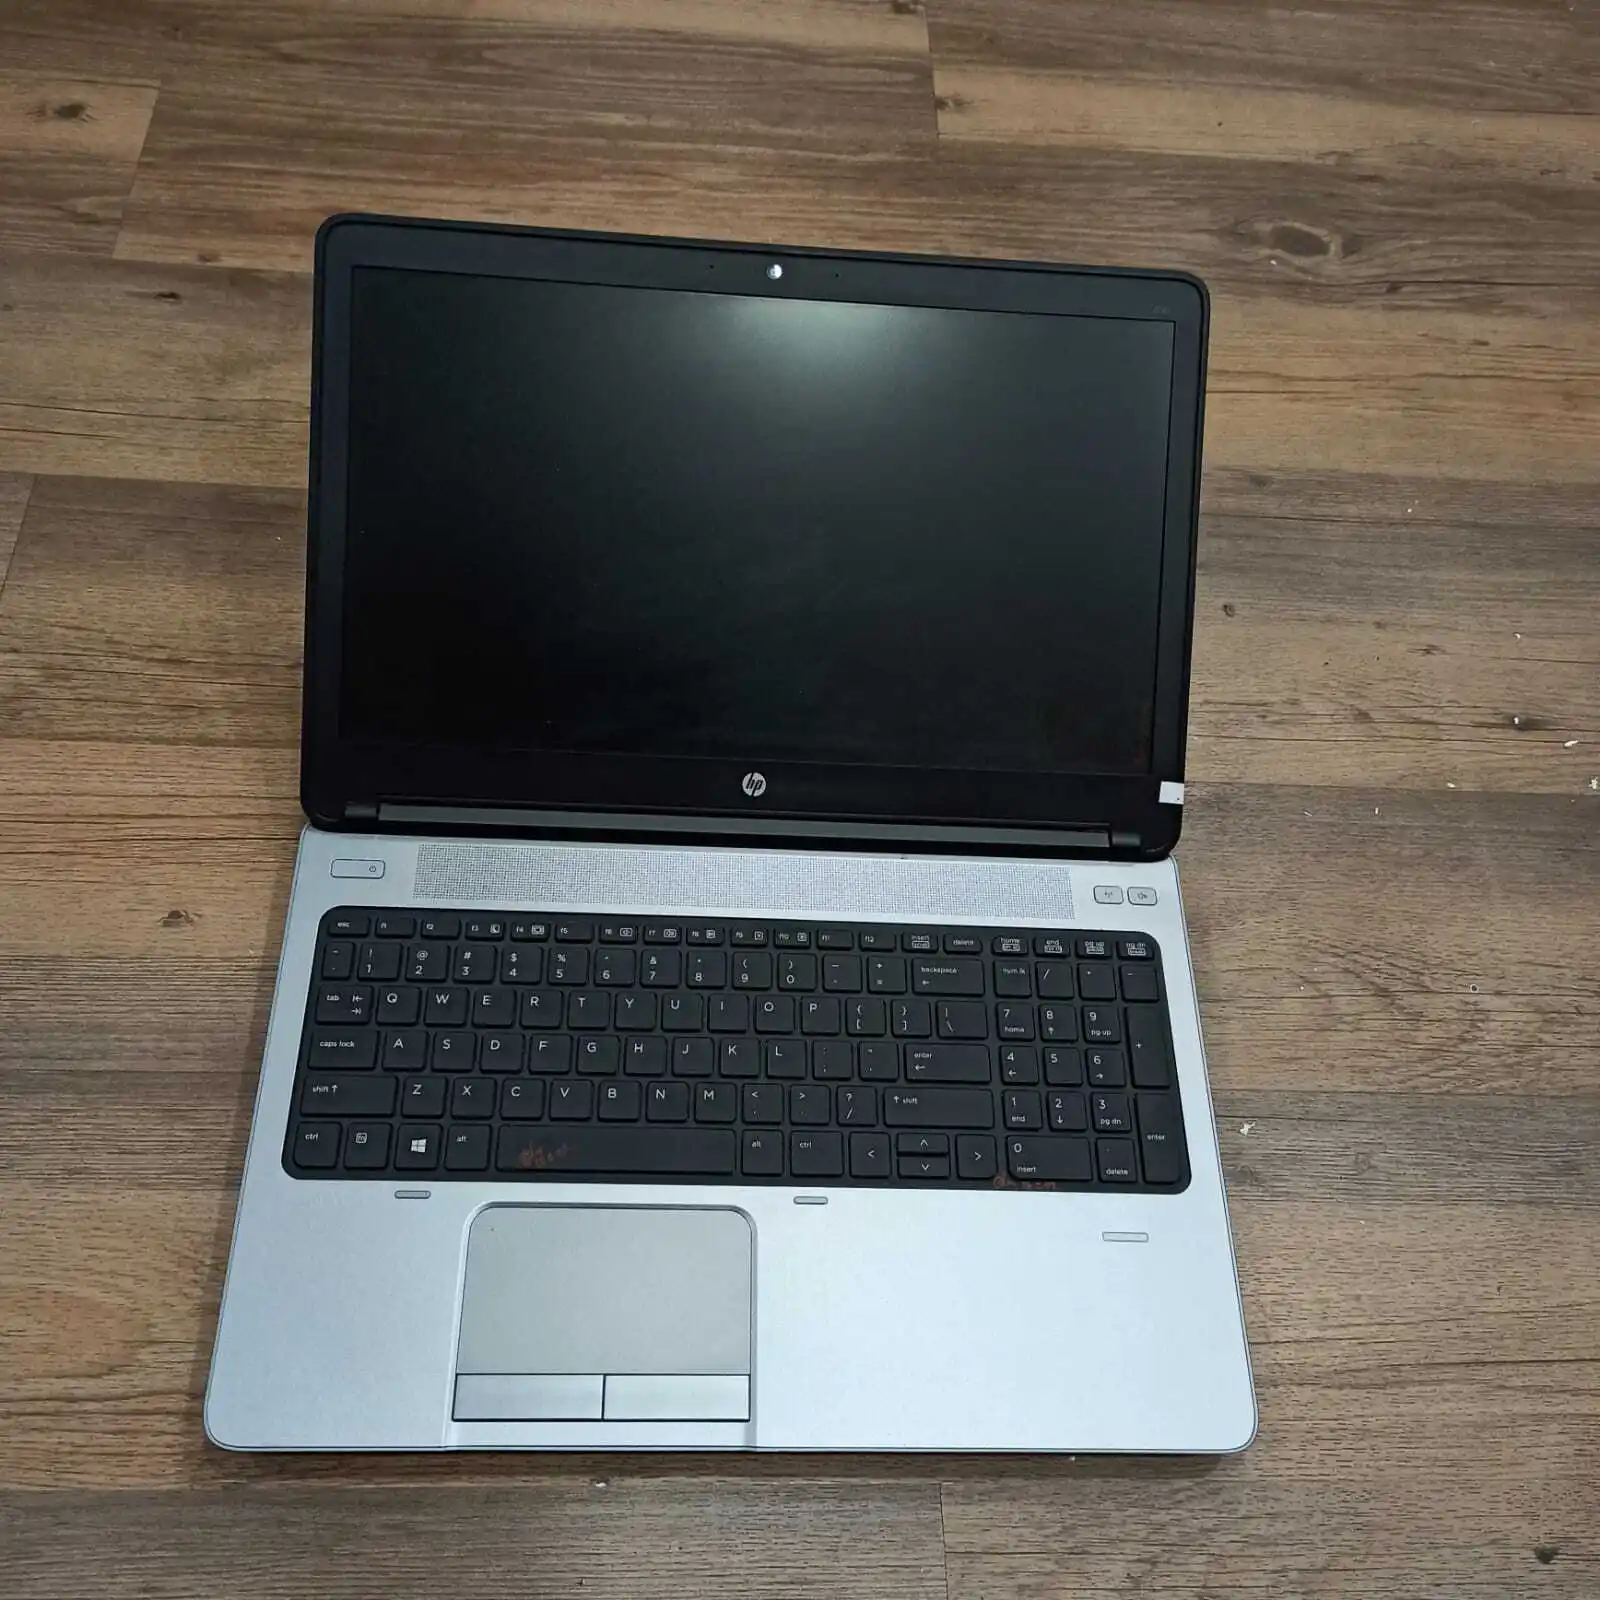 Hp Probook 650 G1 15.6 Inch Hd/Fhd, I5-4210M, Ram 8Gb/8Gb, 500Gb Hdd 2.40Ghz 3Hours